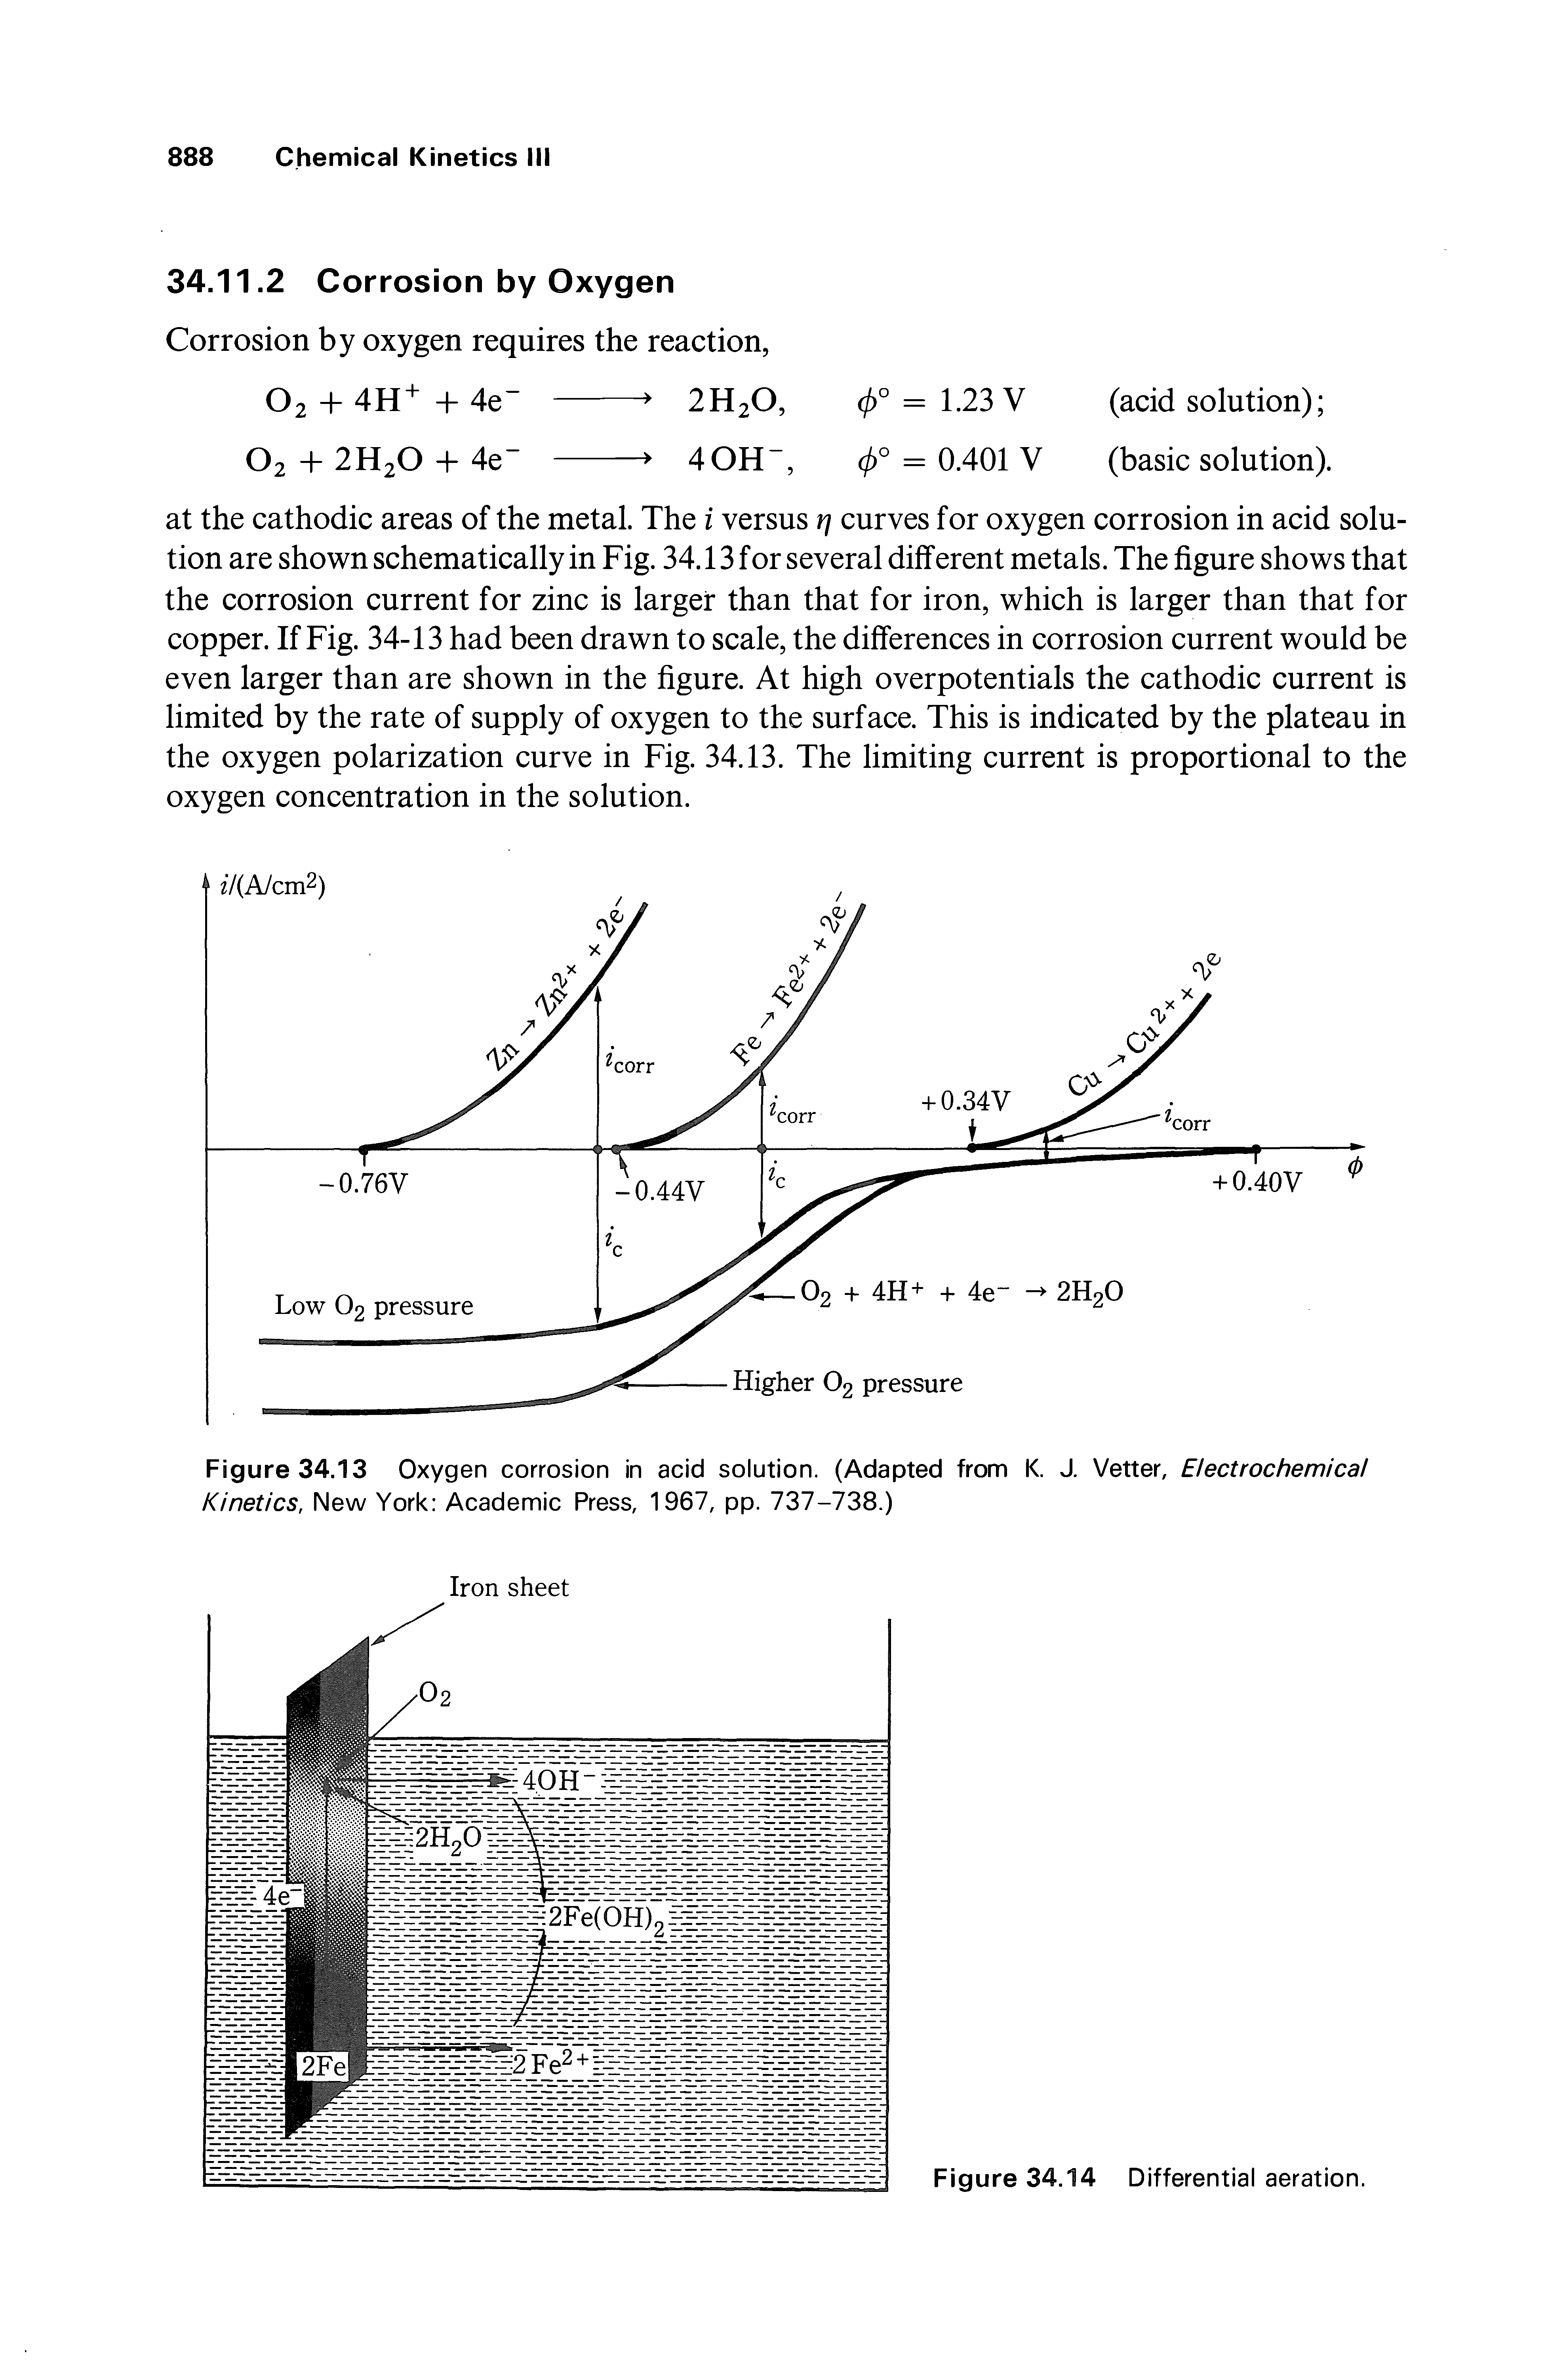 Figure 34.13 Oxygen corrosion in acid solution. (Adapted from K. J. Vetter, Electrochemical Kinetics. New York Academic Press, 1967, pp. 737-738.)...